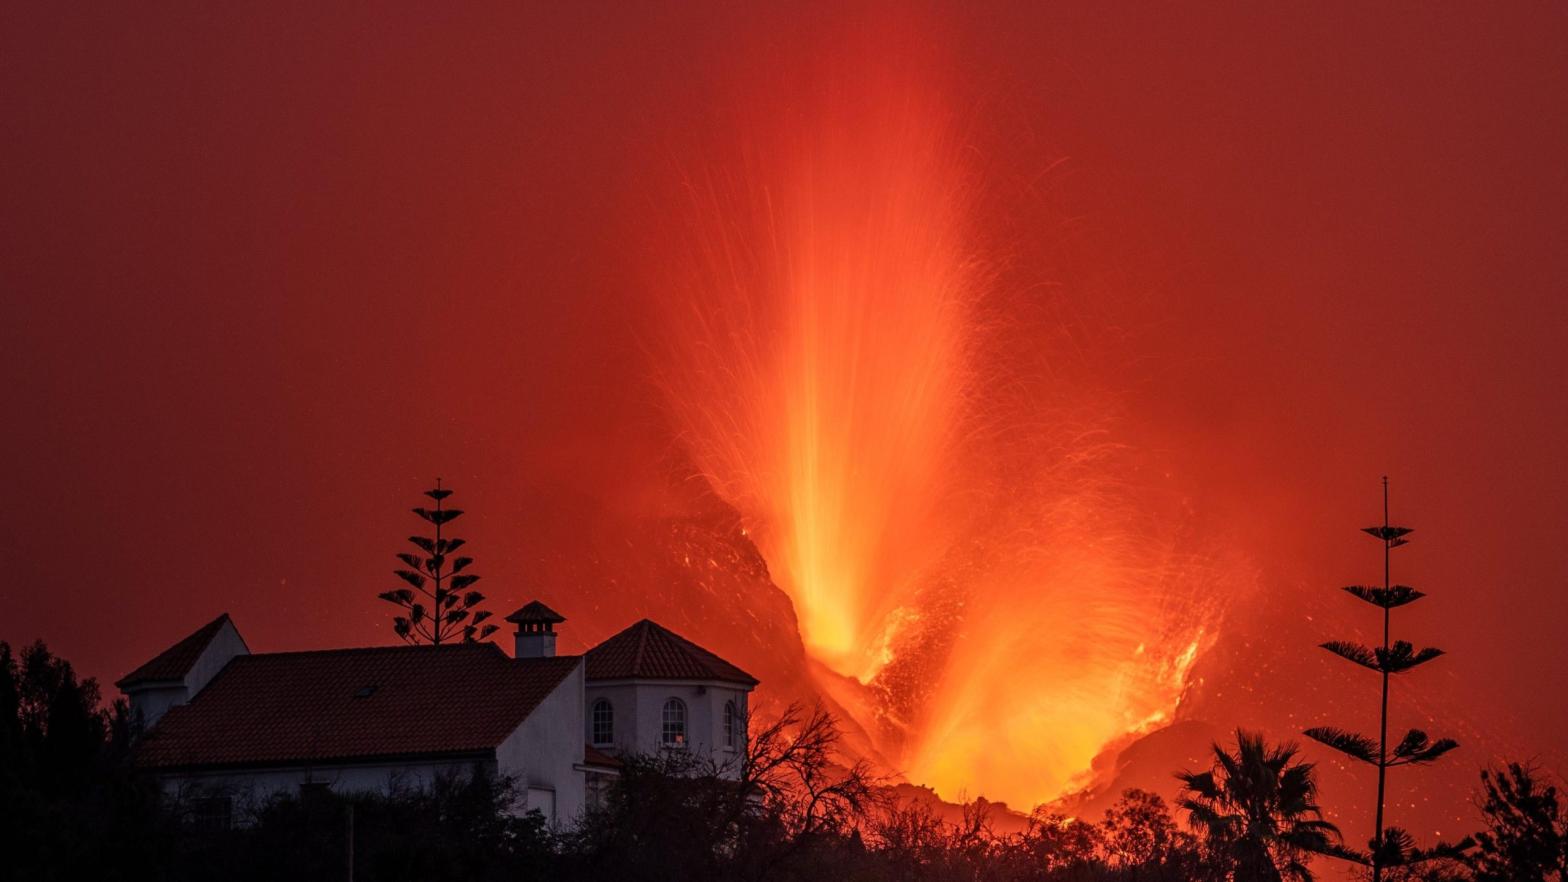 Lava flows from the Cumbre Vieja Volcano on October 9, 2021 in La Palma, Spain. (Photo: Marcos del Mazo, Getty Images)